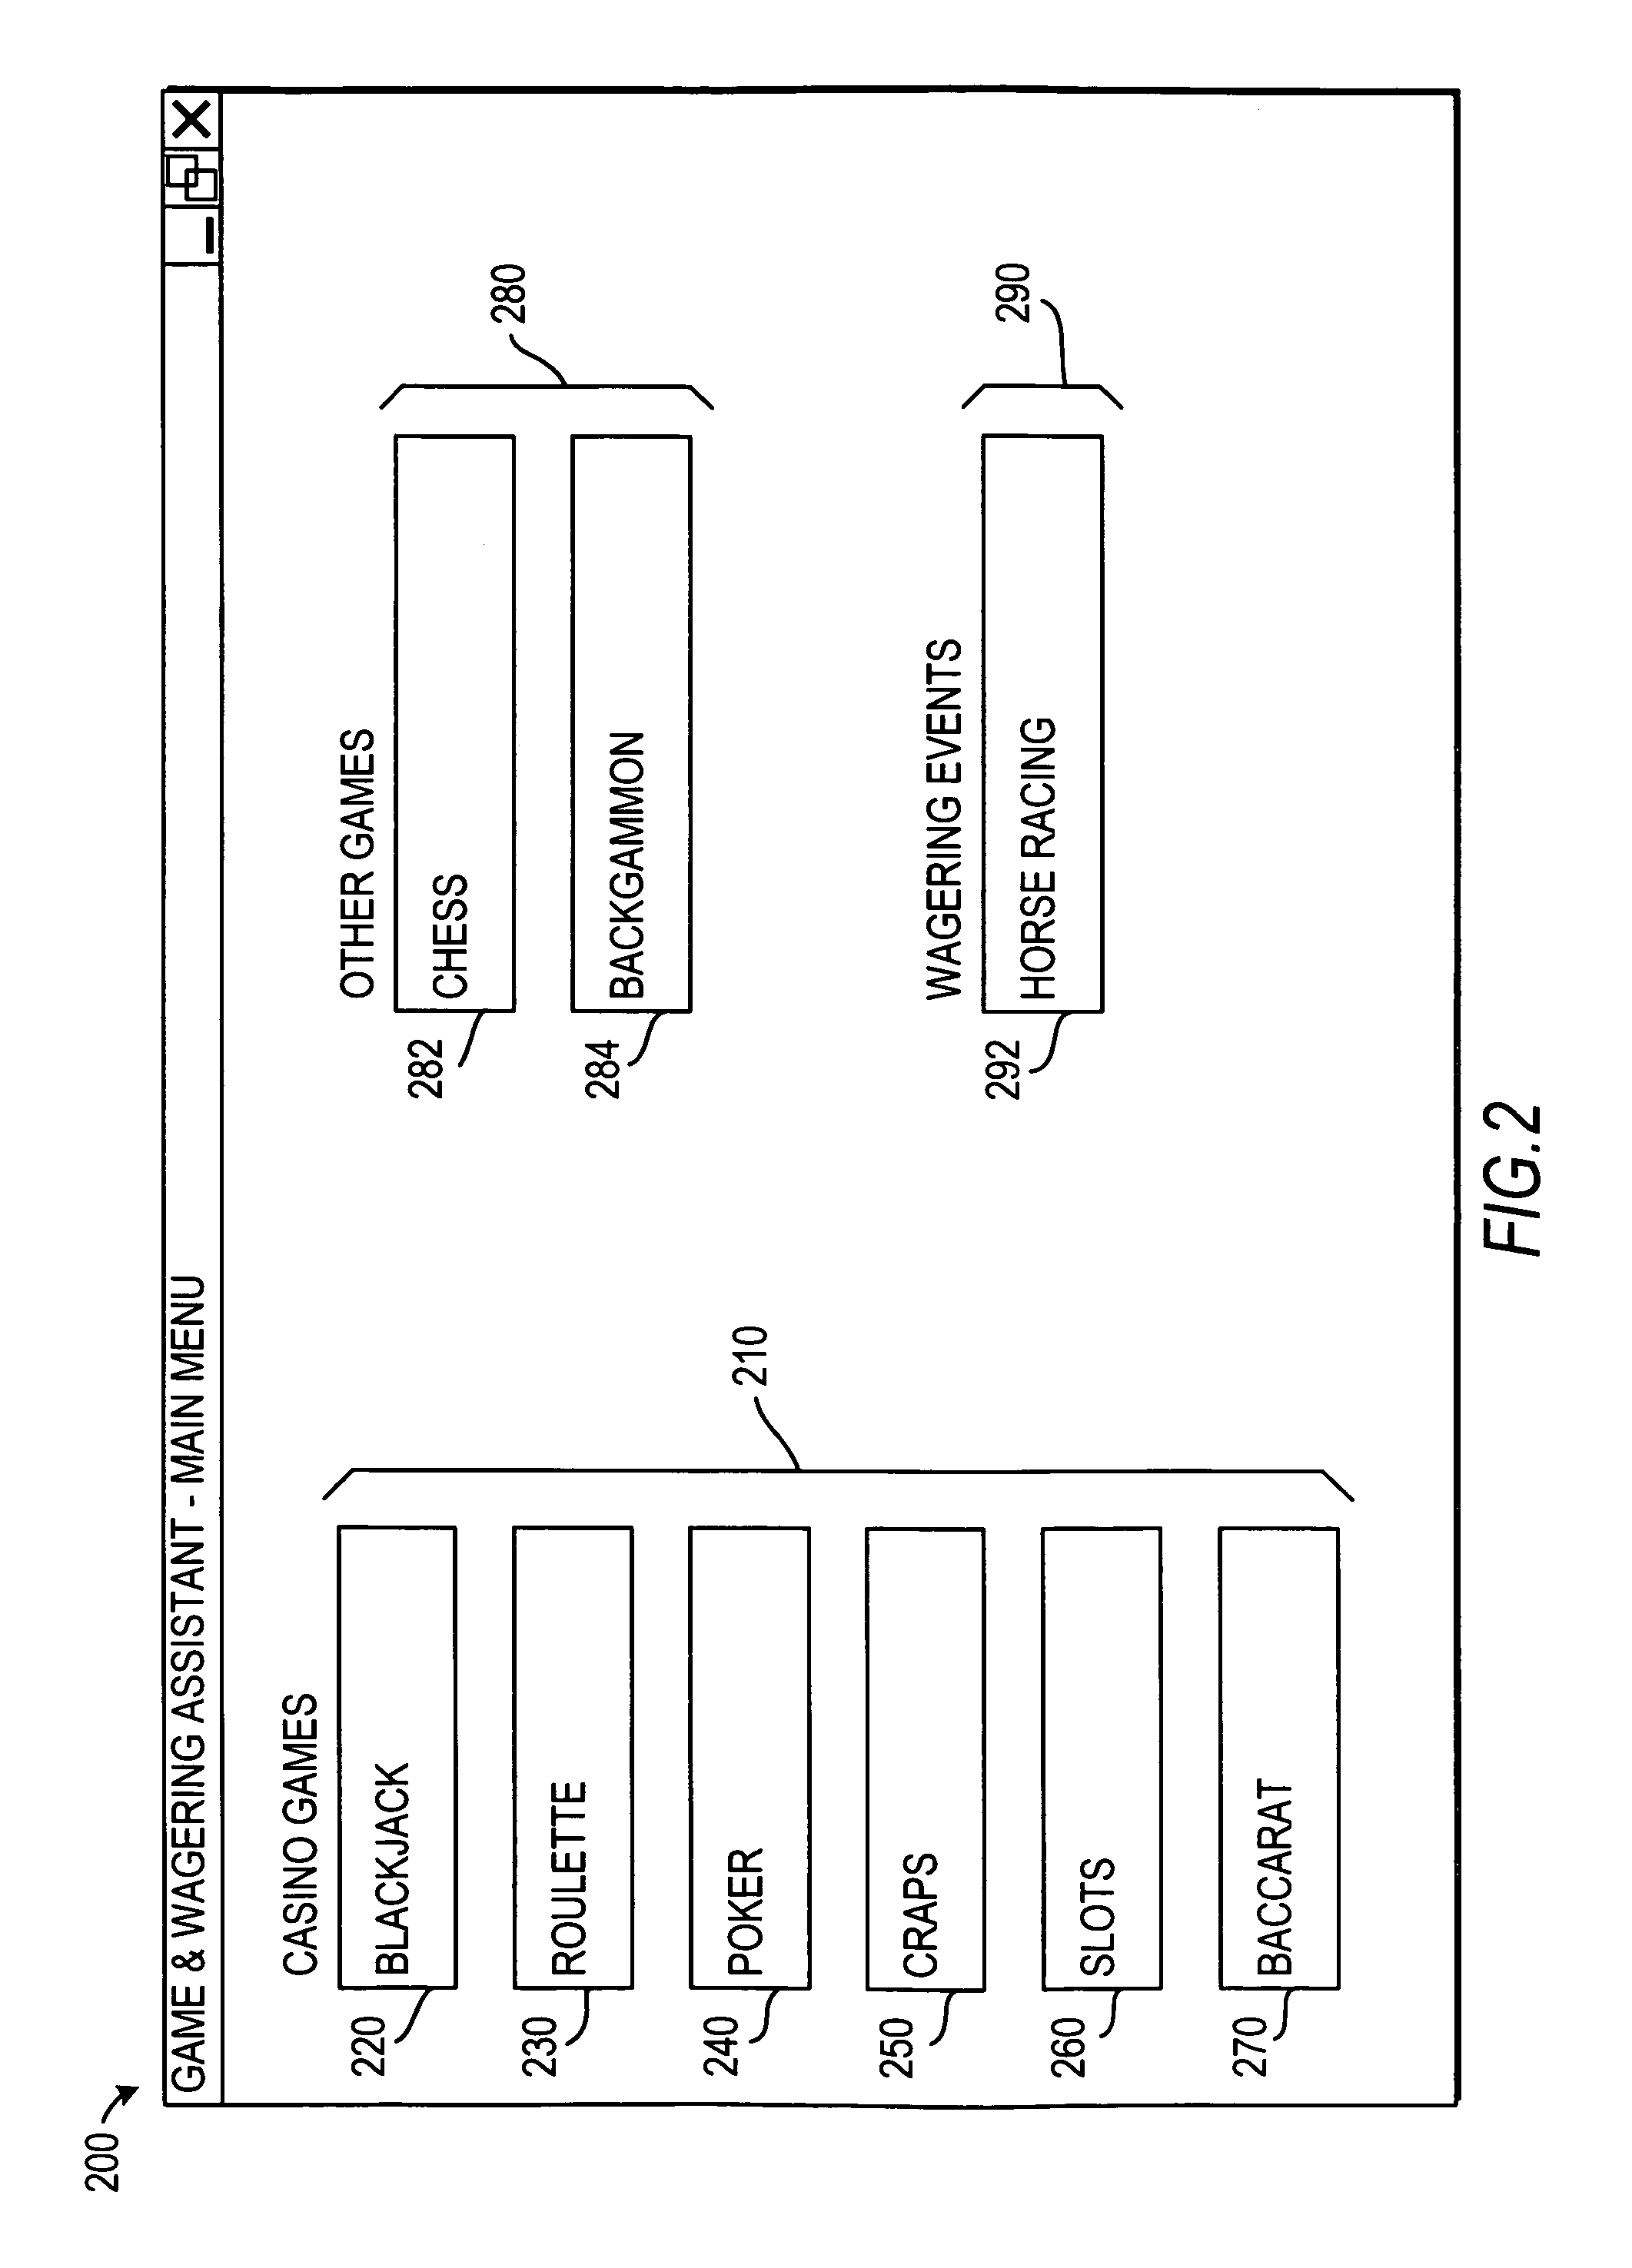 Systems and methods for assisting in game play and wagering